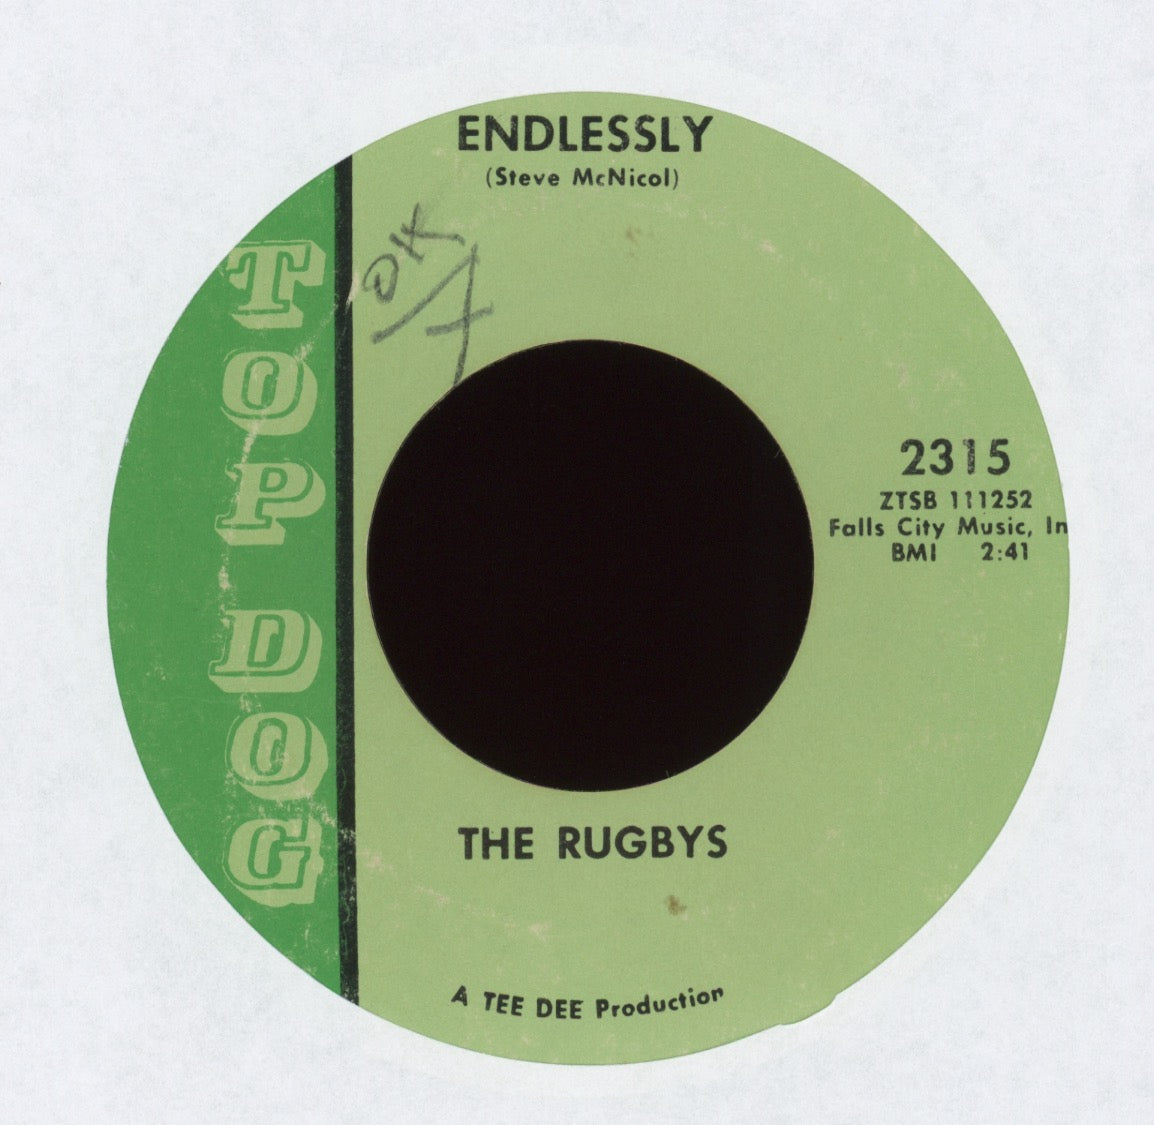 The Rugbys - Walking the Streets Tonight on Top Dog